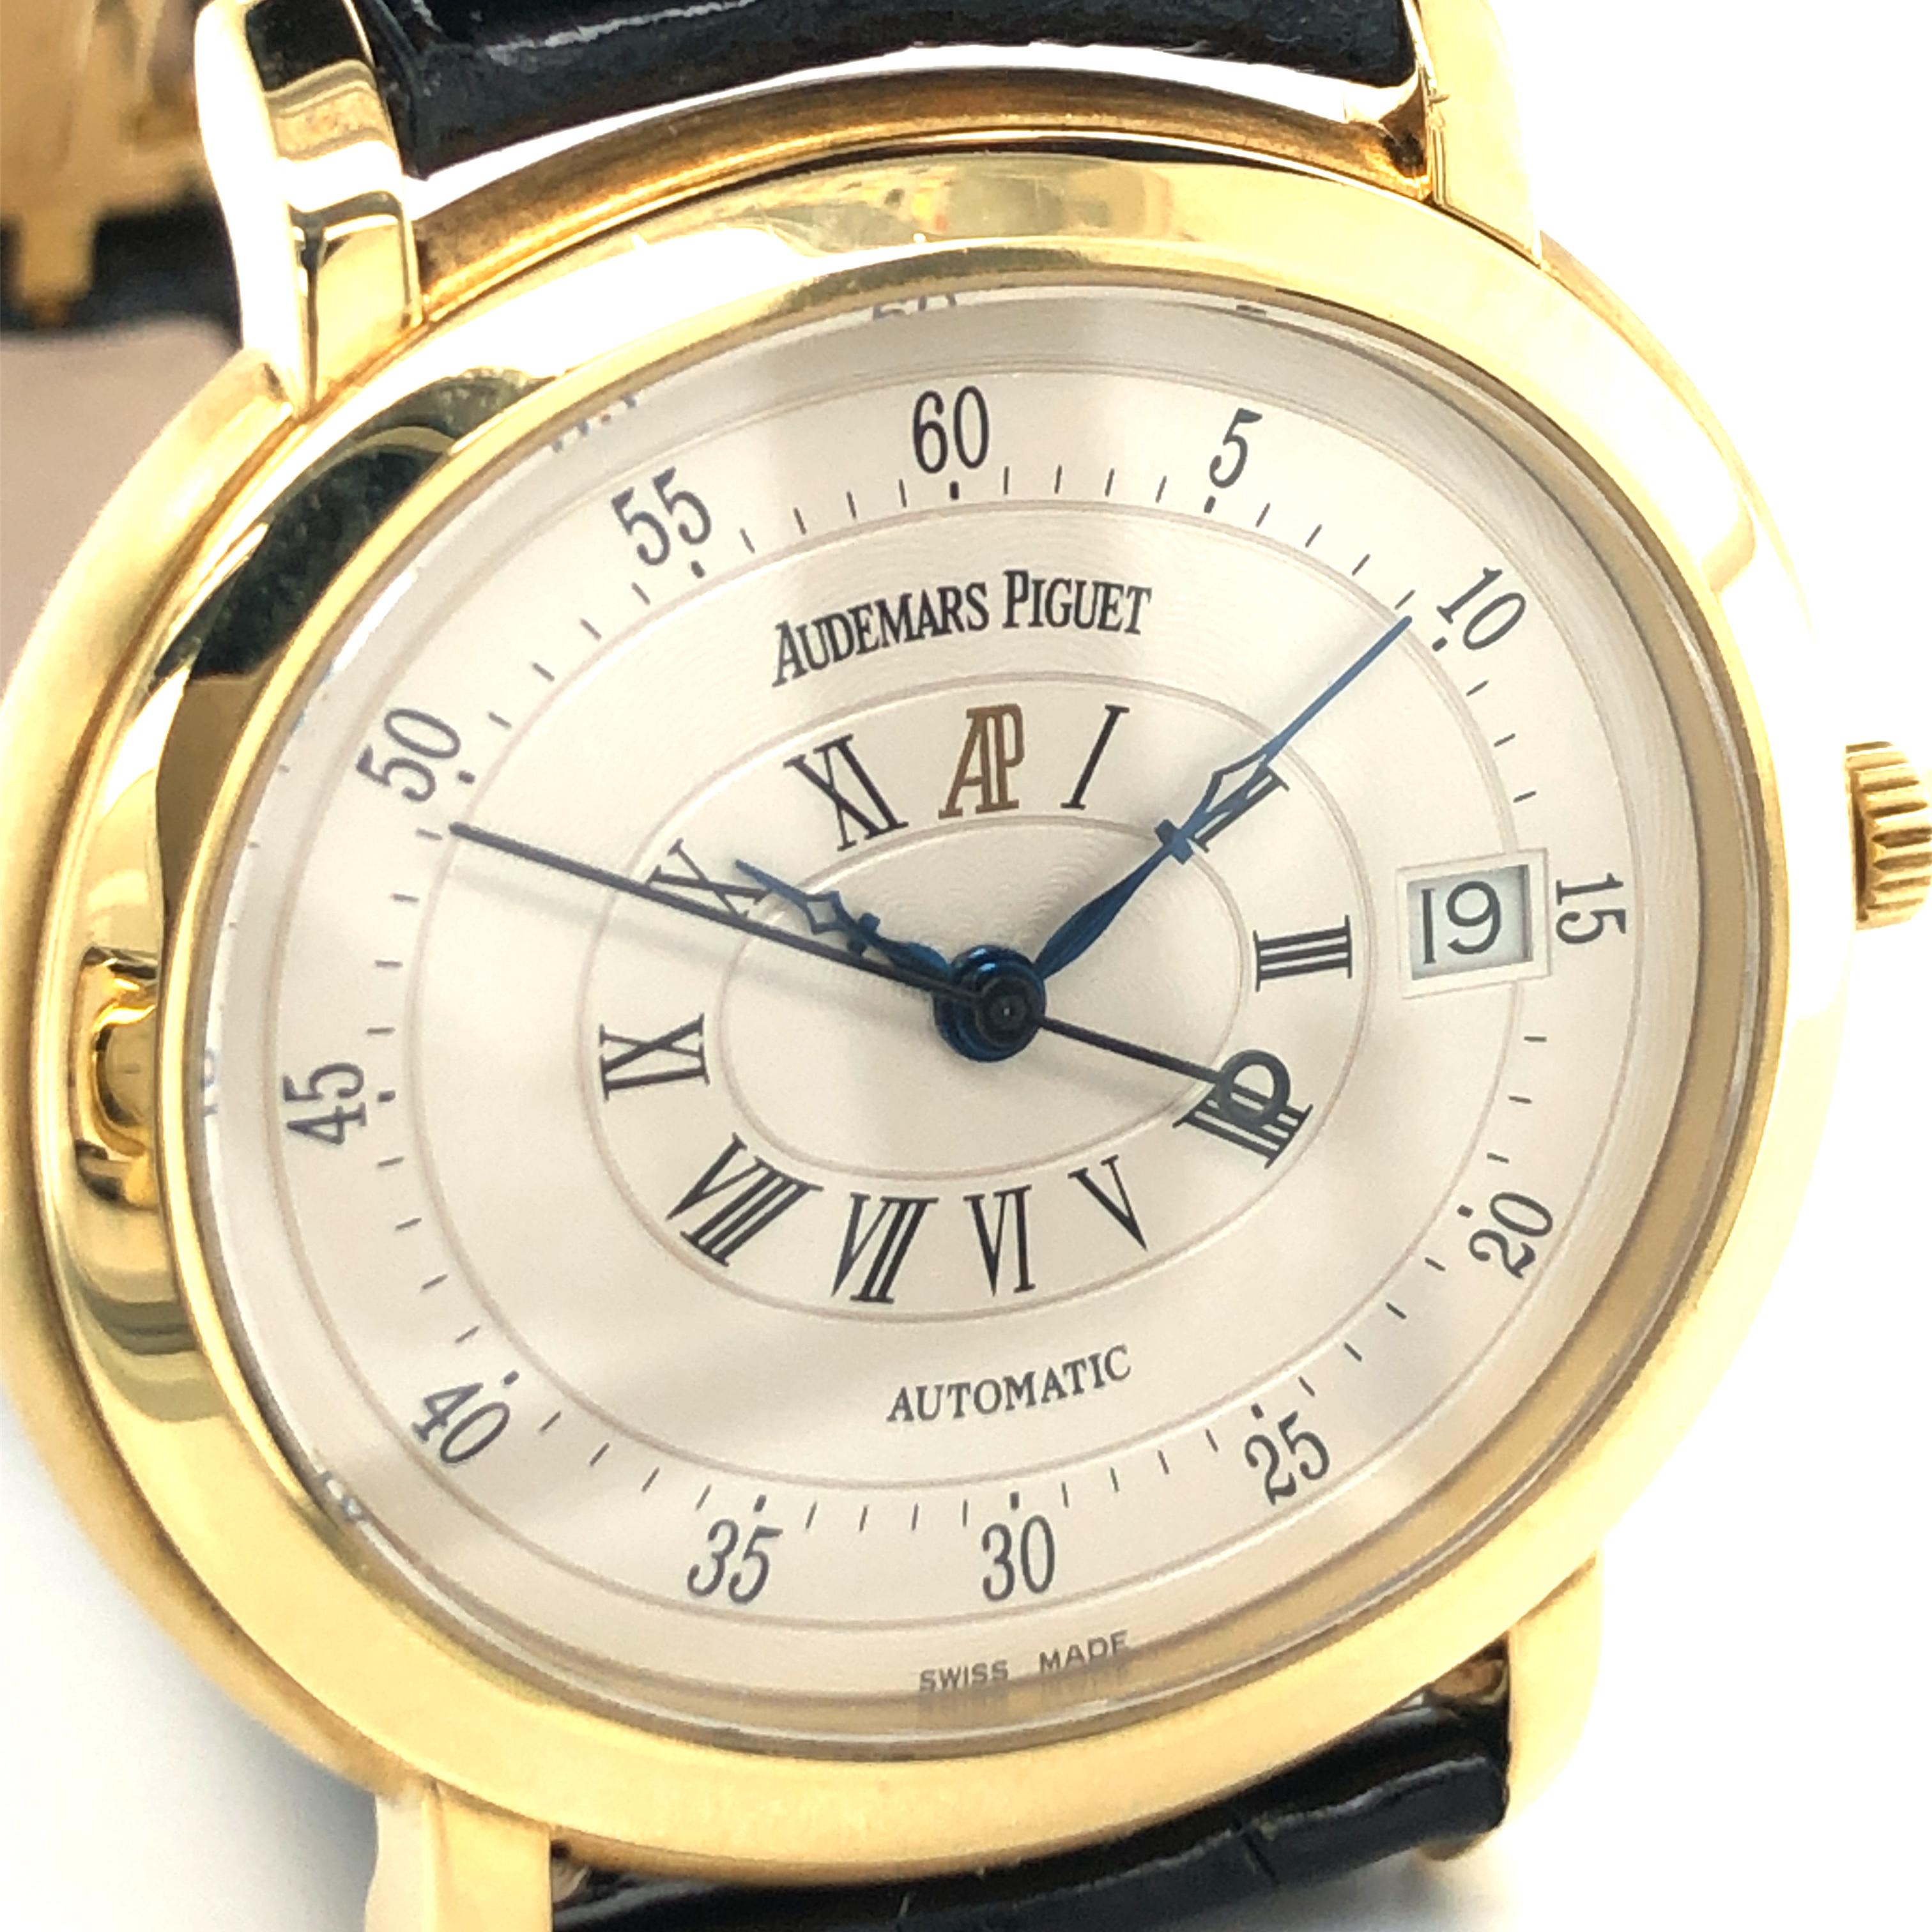 Preowned Gents Audemars Piguet Millenary in 18karat yellow gold Ref. 14908. Comes with new black AP leather strap and original AP yellow gold deploying clasp. The oval case measures 39 x 35 mm. Scratch resistant sapphire crystal.

Beige Roman and